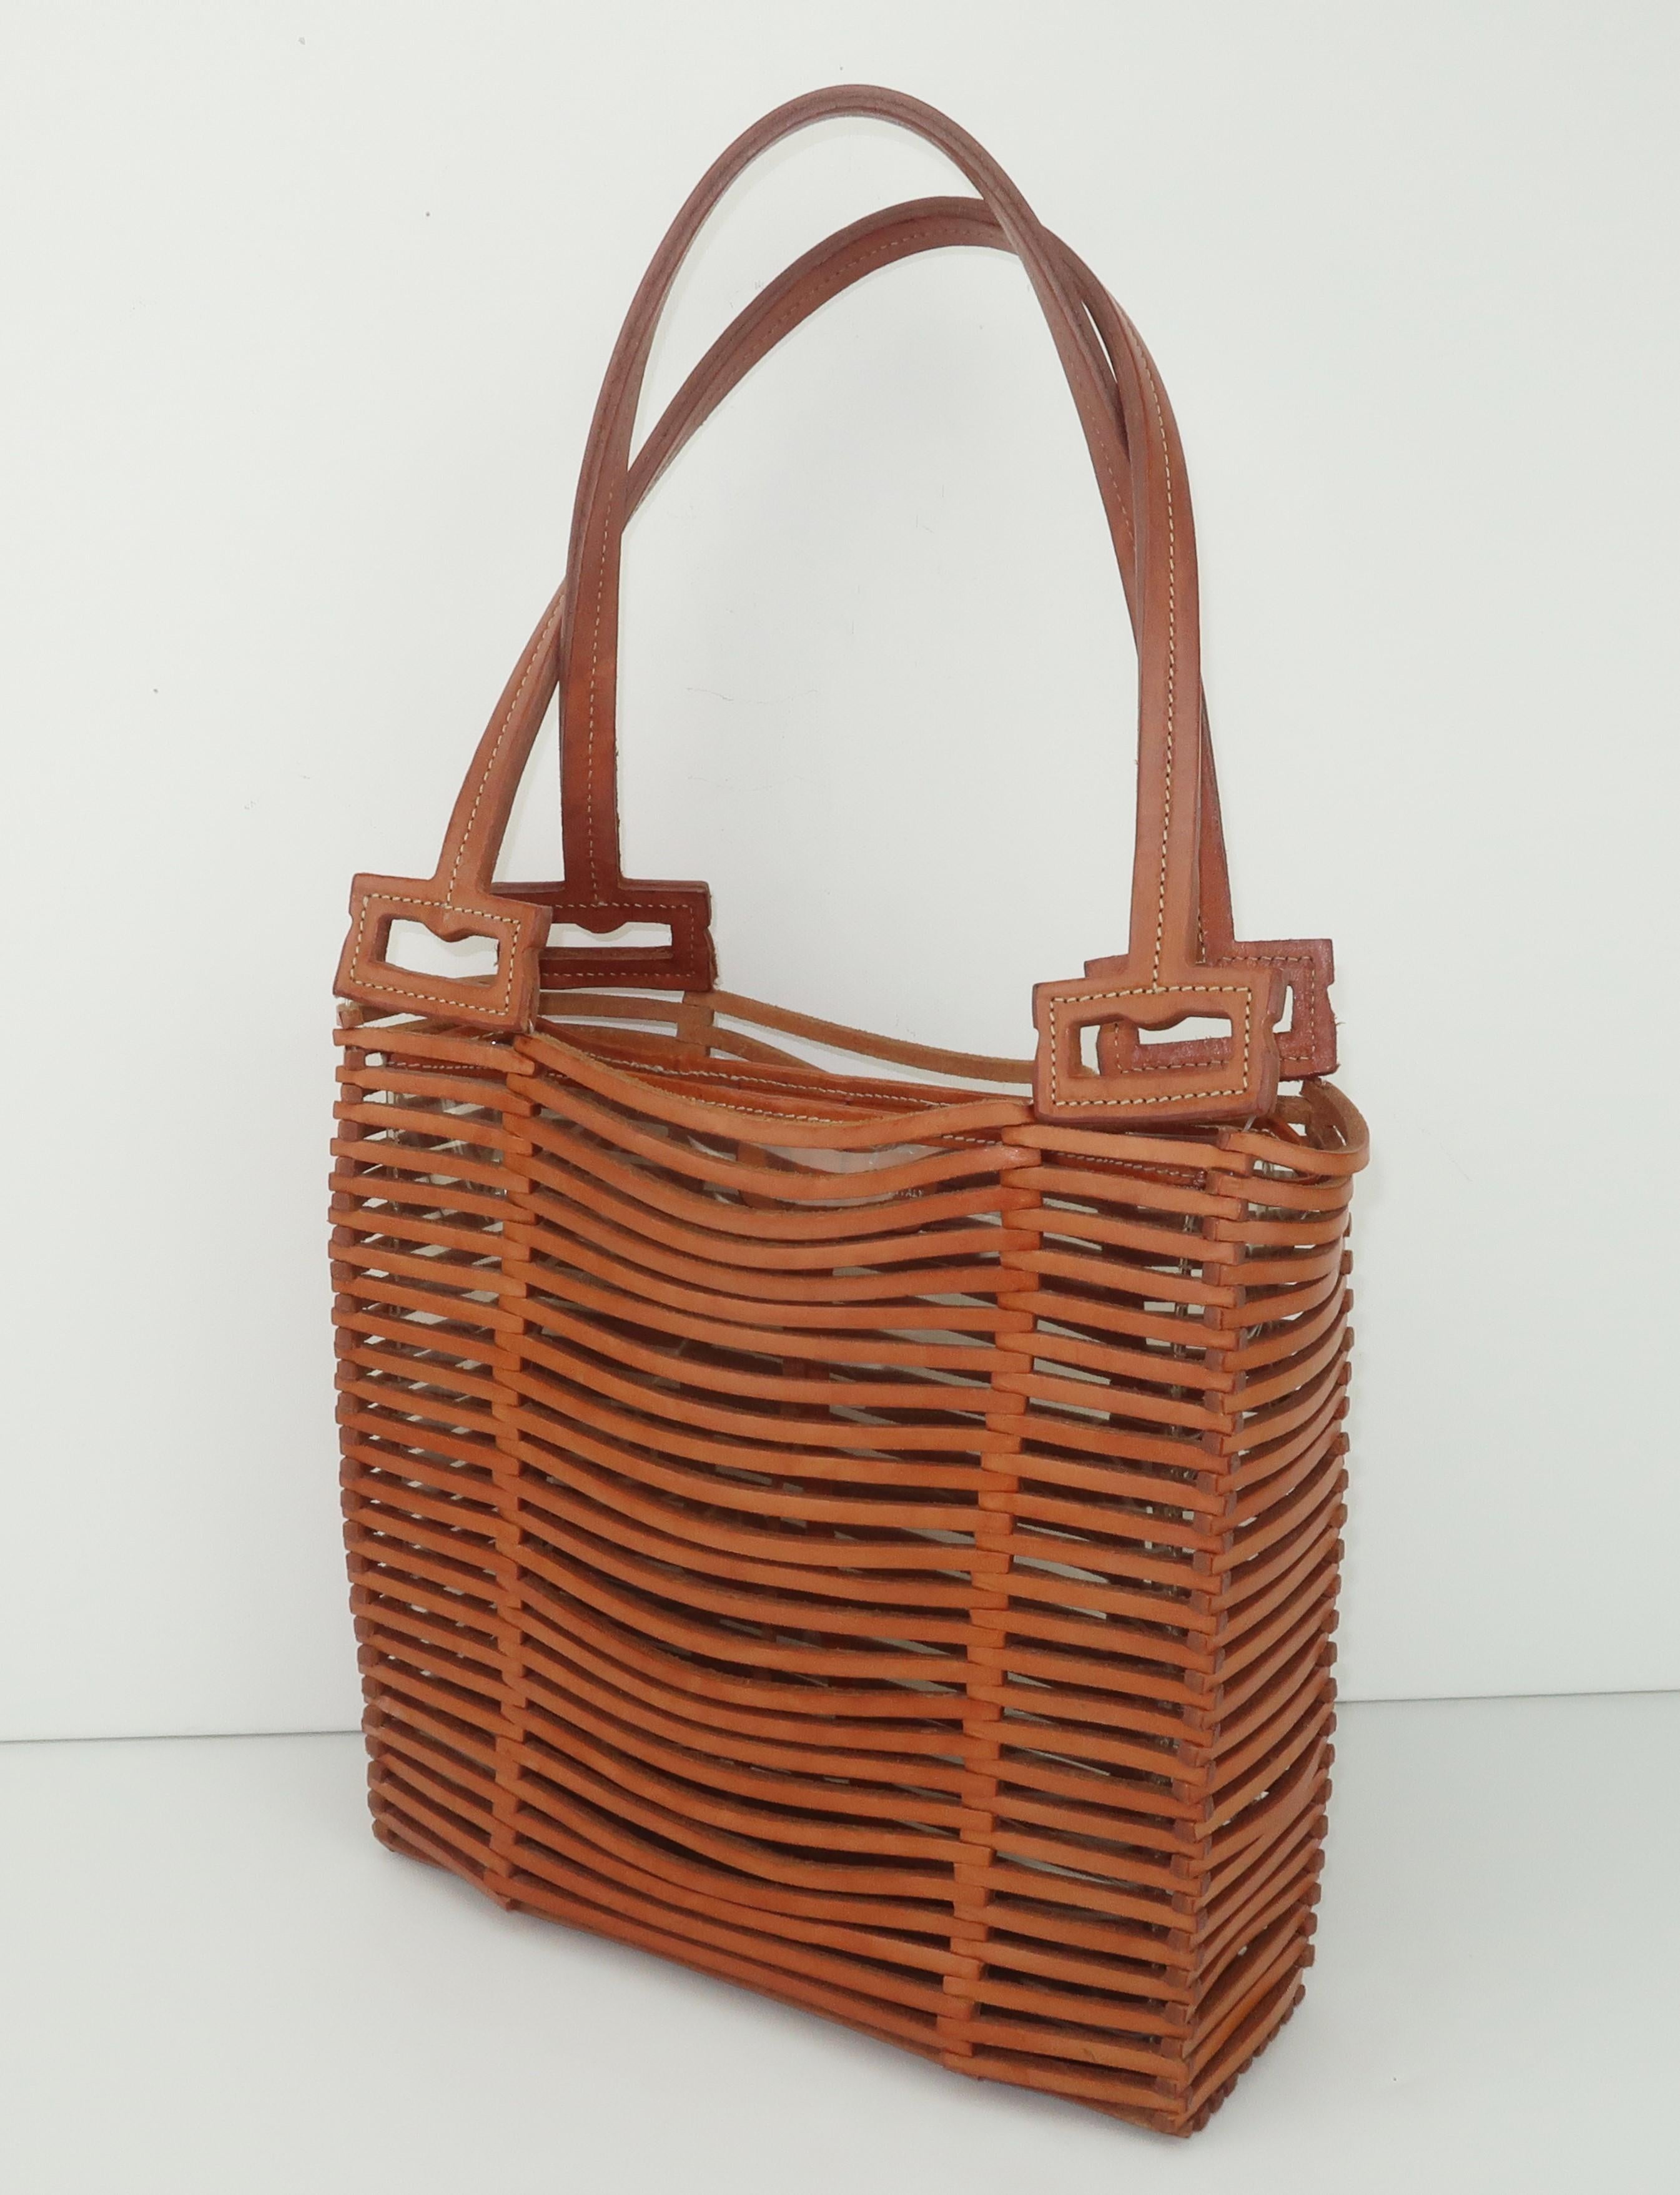 Vintage Ferragamo tan woven leather handbag with a tote style silhouette and a casual look perfect for warm weather seasons.  The clever design is reminiscent of the open weave bamboo bags from the 1940's but Ferragamo's version bears the fashion